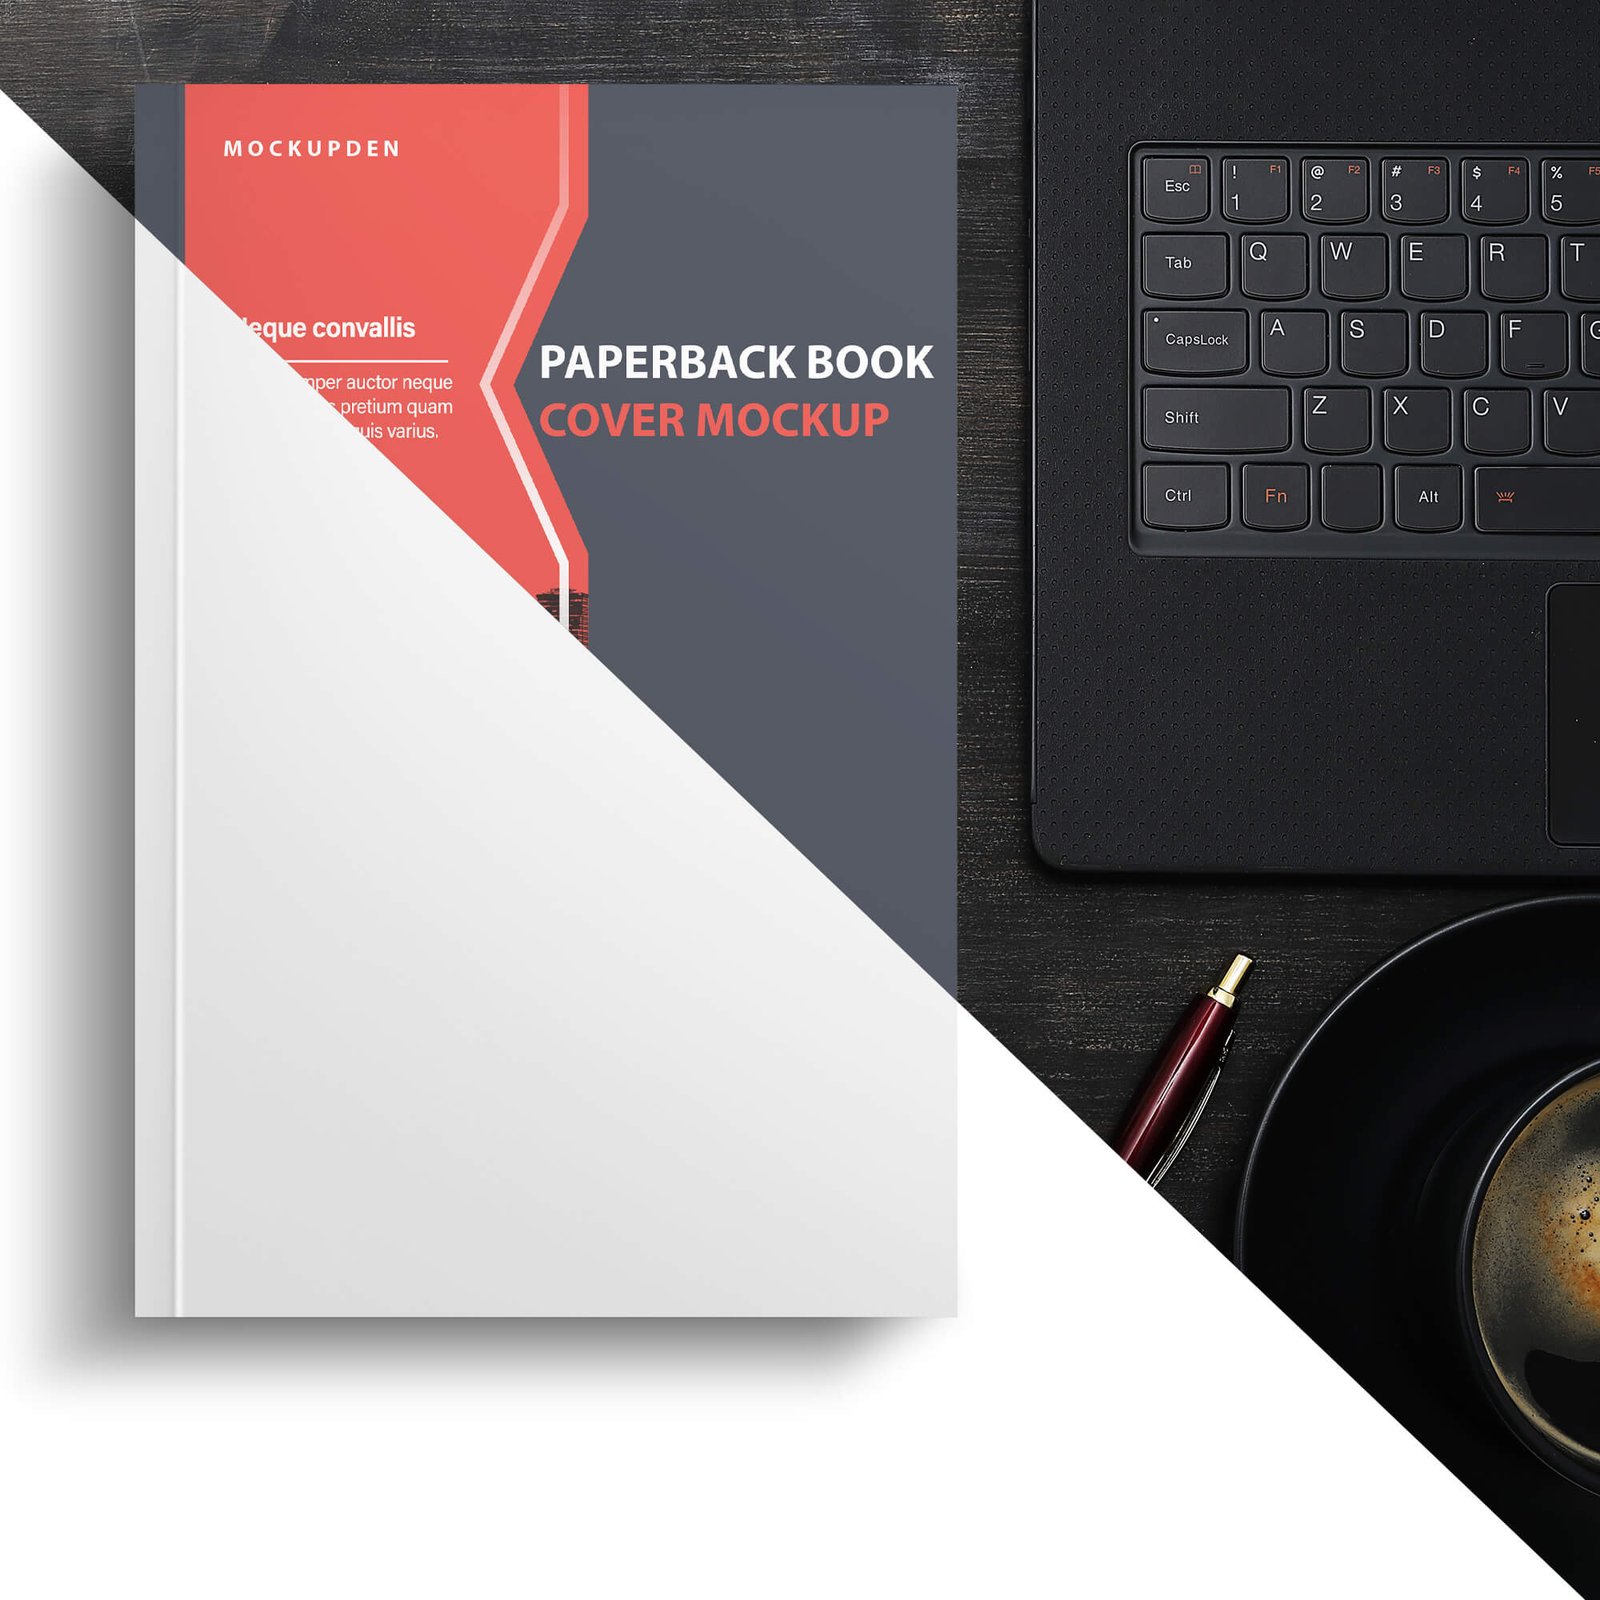 Editable Free Paperback Book Cover Mockup PSD Template